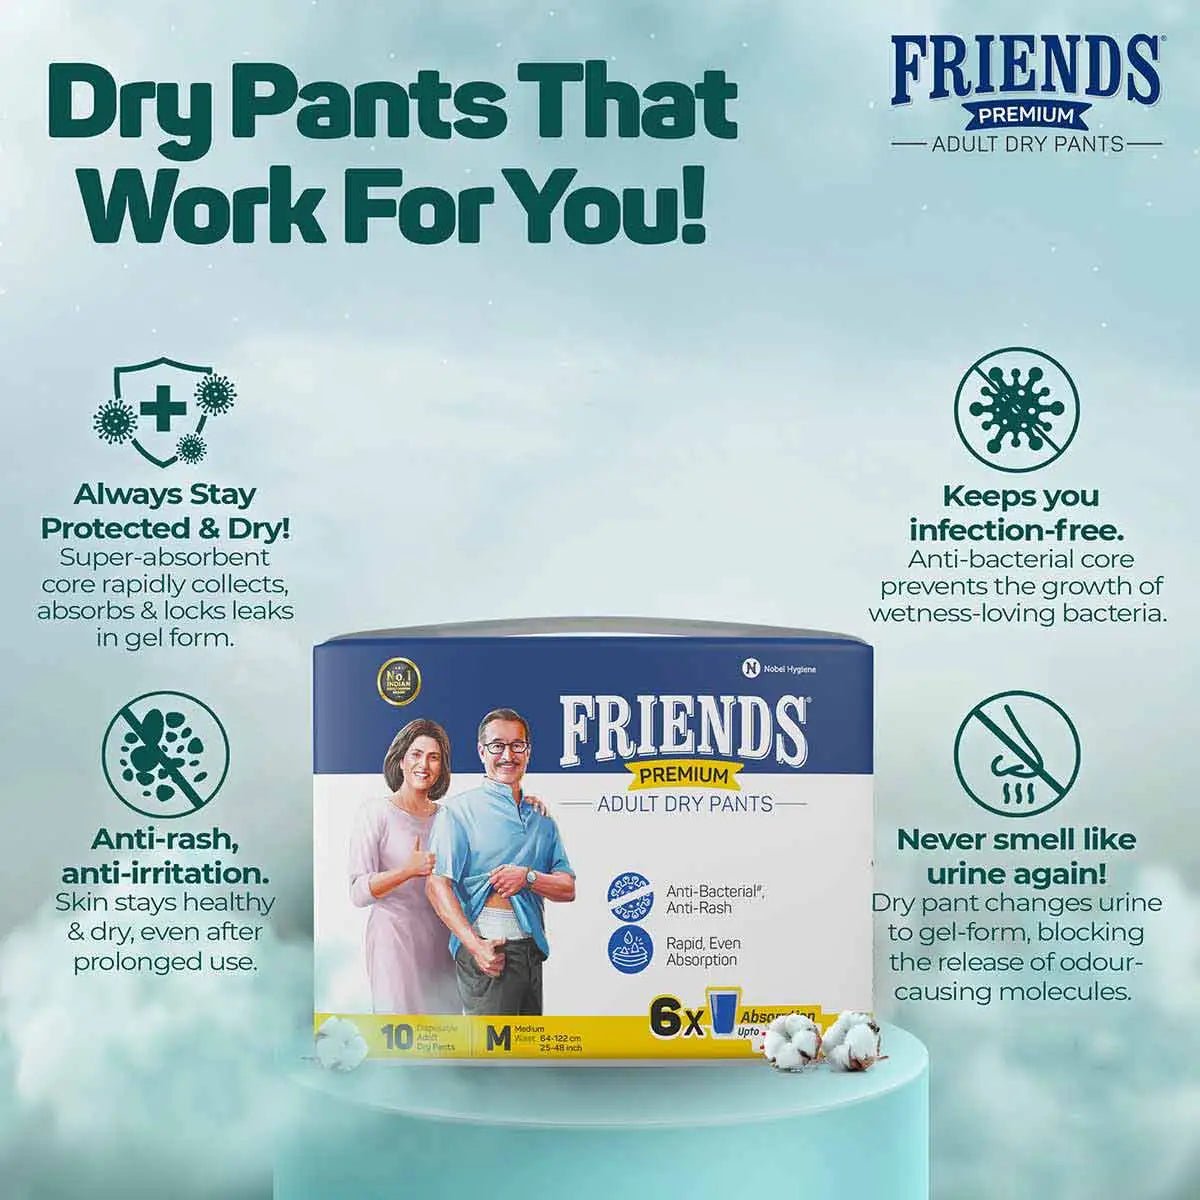 Buy Friends Adult Dry Pants - Premium (M) 10's Online at Discounted Price |  Netmeds